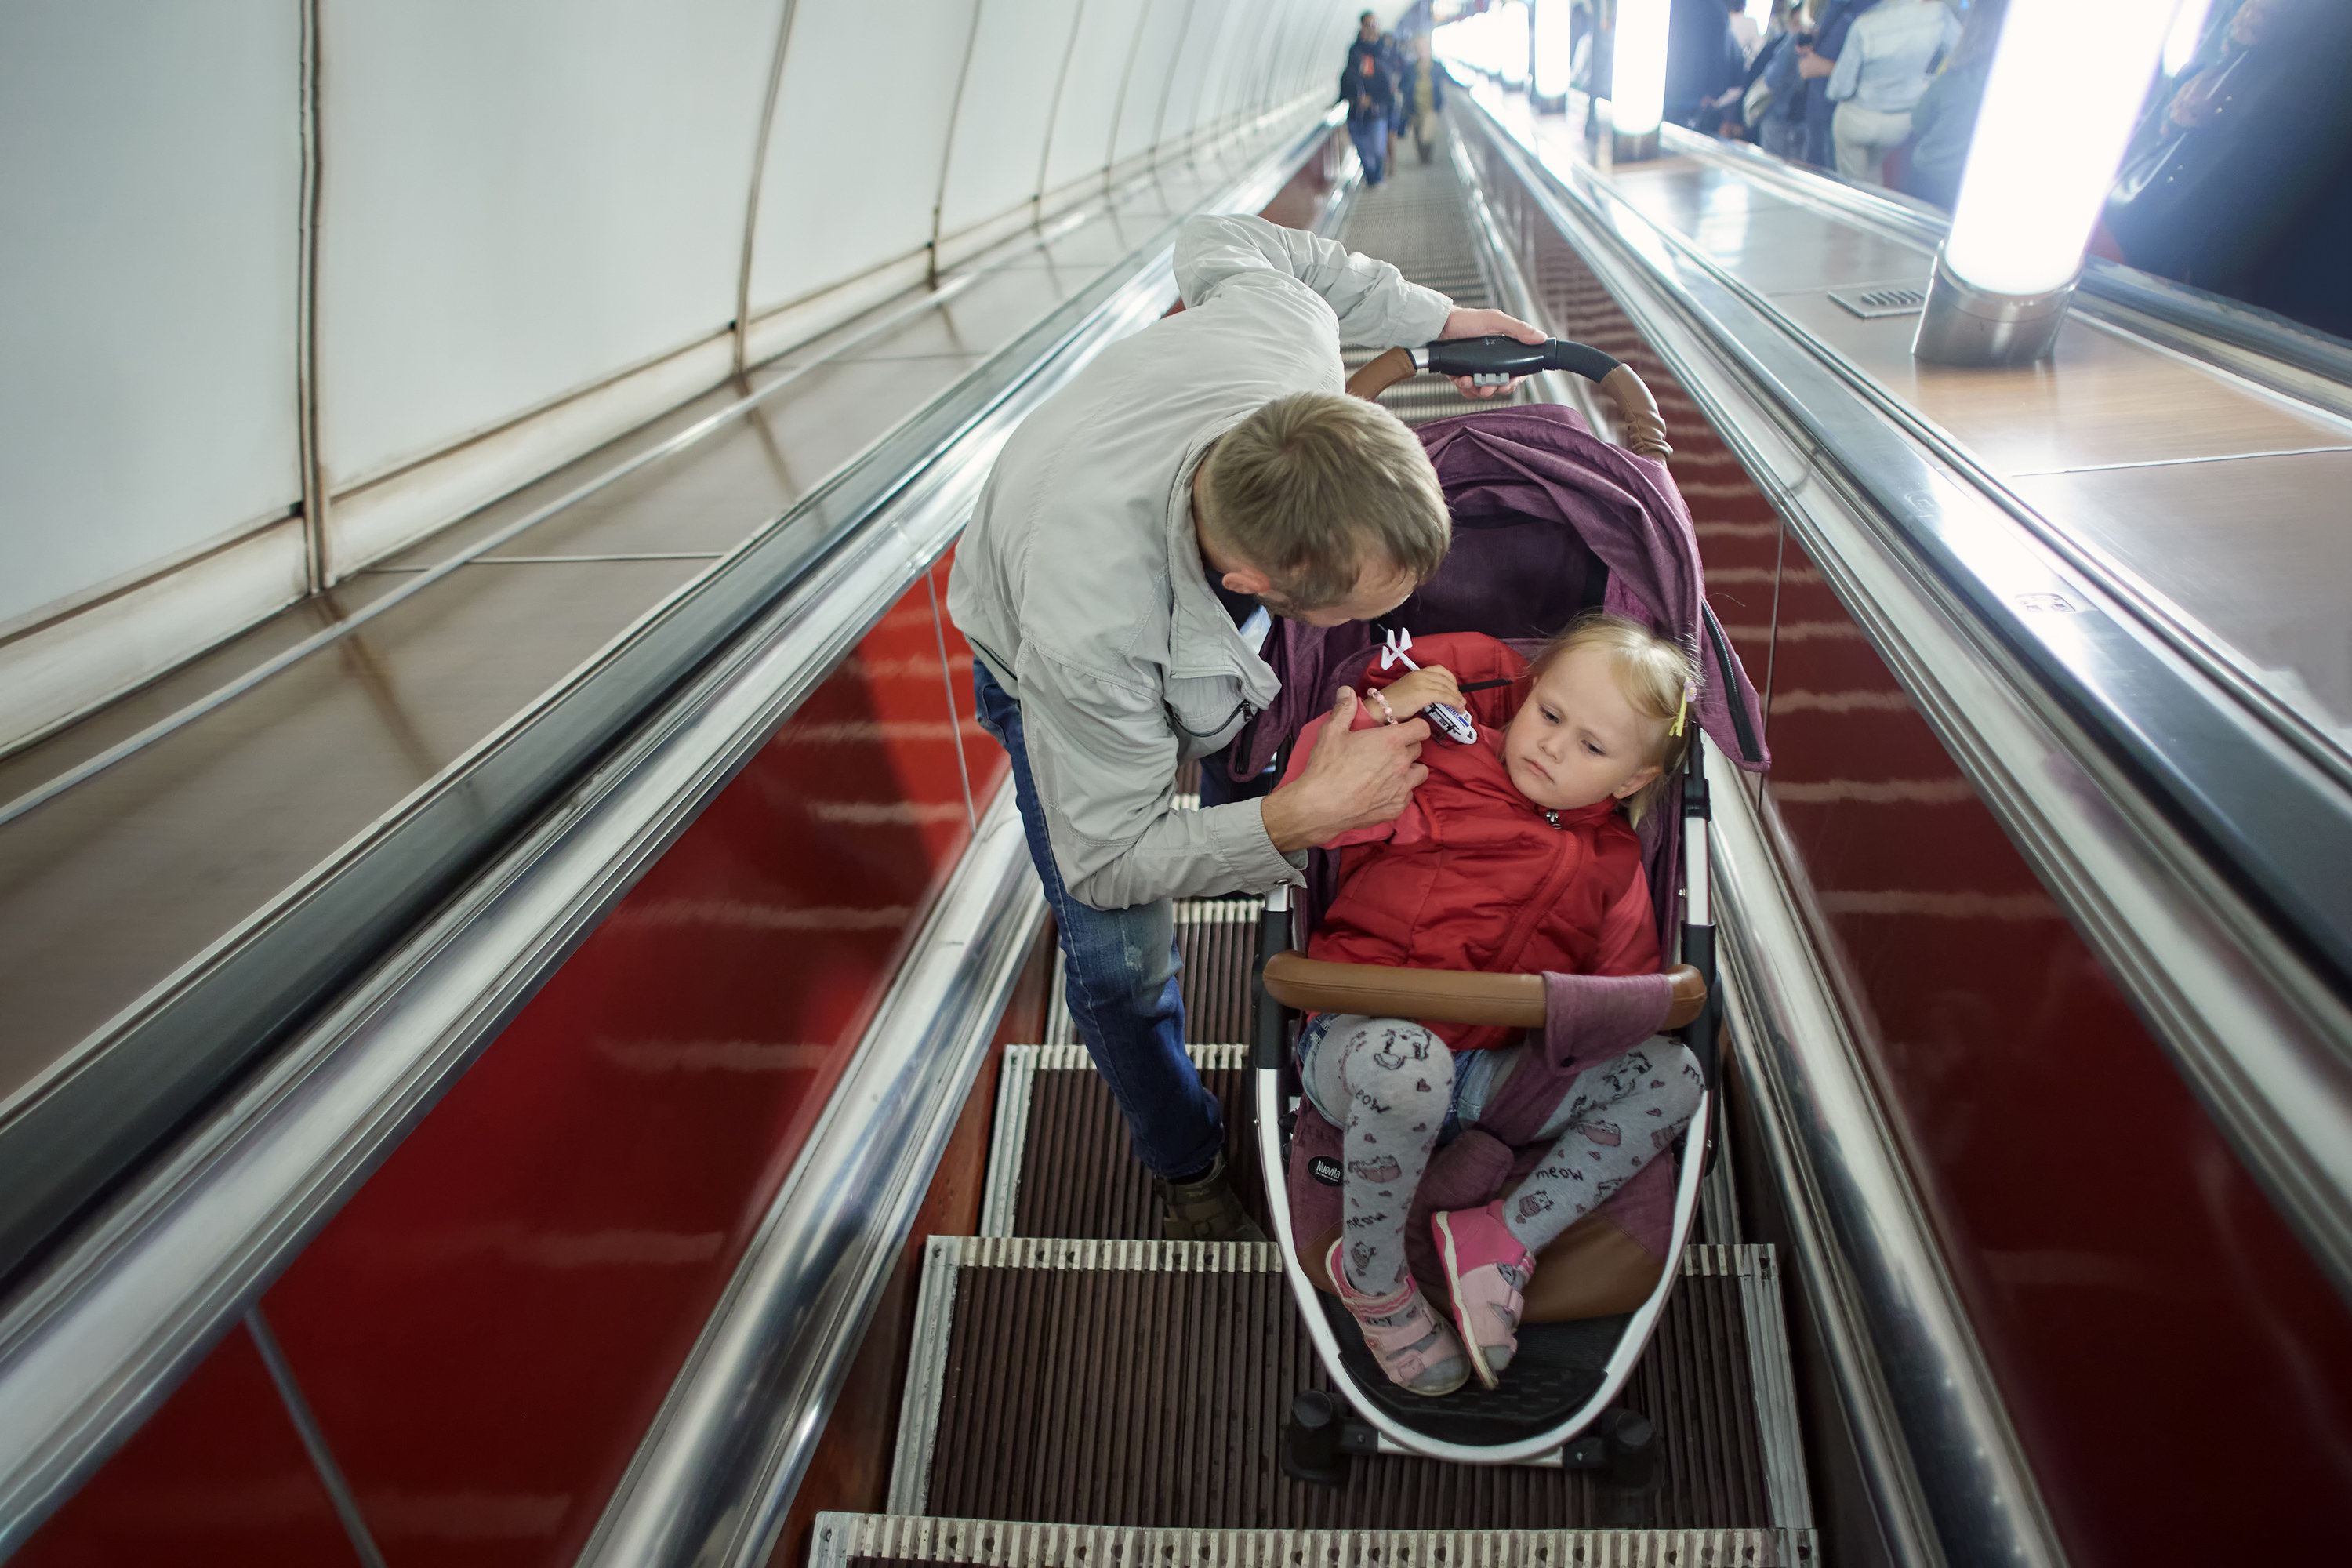 Little girl in baby carriage with father on escalator in subway